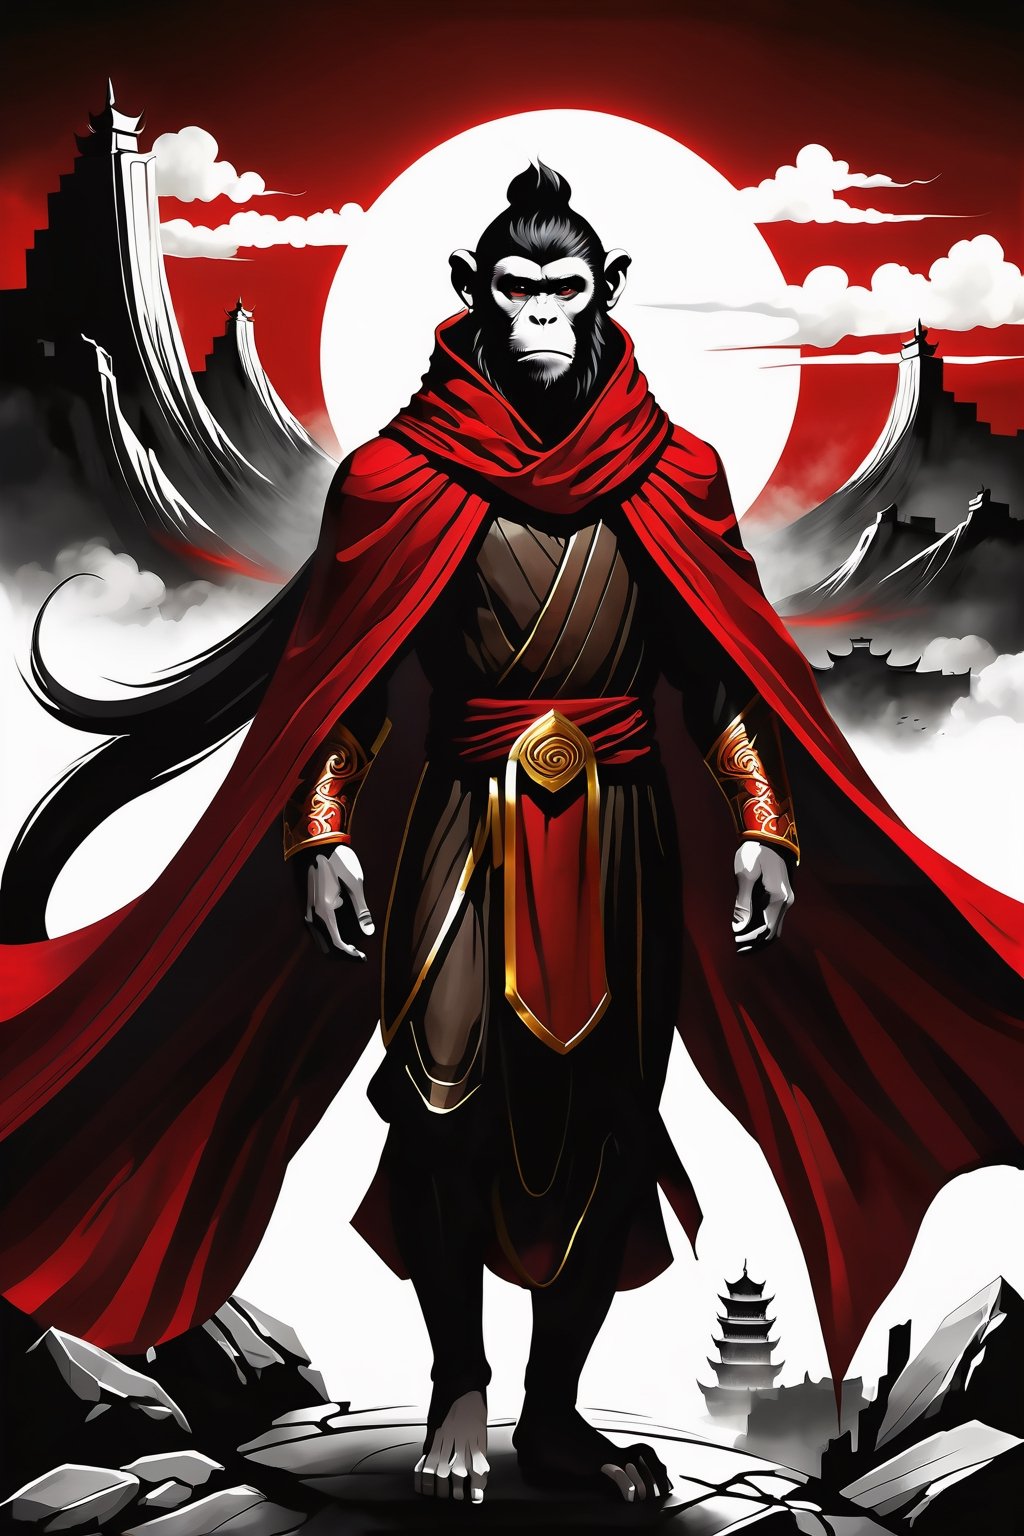 a man  Mythical hero Monkey-like features Playful yet serious expression Humanoid figure Expressive facial features Mystical aura Iconic headband Tail  
Ancient city Ultra-fine painting
Black armor
Red cloak
Fierce expression
Indomitable will
Invincible aura
Lonely guardian
Warring States, Three Kingdoms style
Aerial view
Ferocious face
Sharp eyes
Fluttering armor and cloak
Ruined ancient city
Desolate atmosphere
Central figure
Dark sky
Dark, gray, brown tones Red and gold highlights


3D Realistic Style Highly detailed 4k, 8k, highres: 4K, 8K
Realistic, photorealistic, photo-realistic, in the style of esao andrews,DonM3lv3nM4g1cXL,LegendDarkFantasy,more detail XL